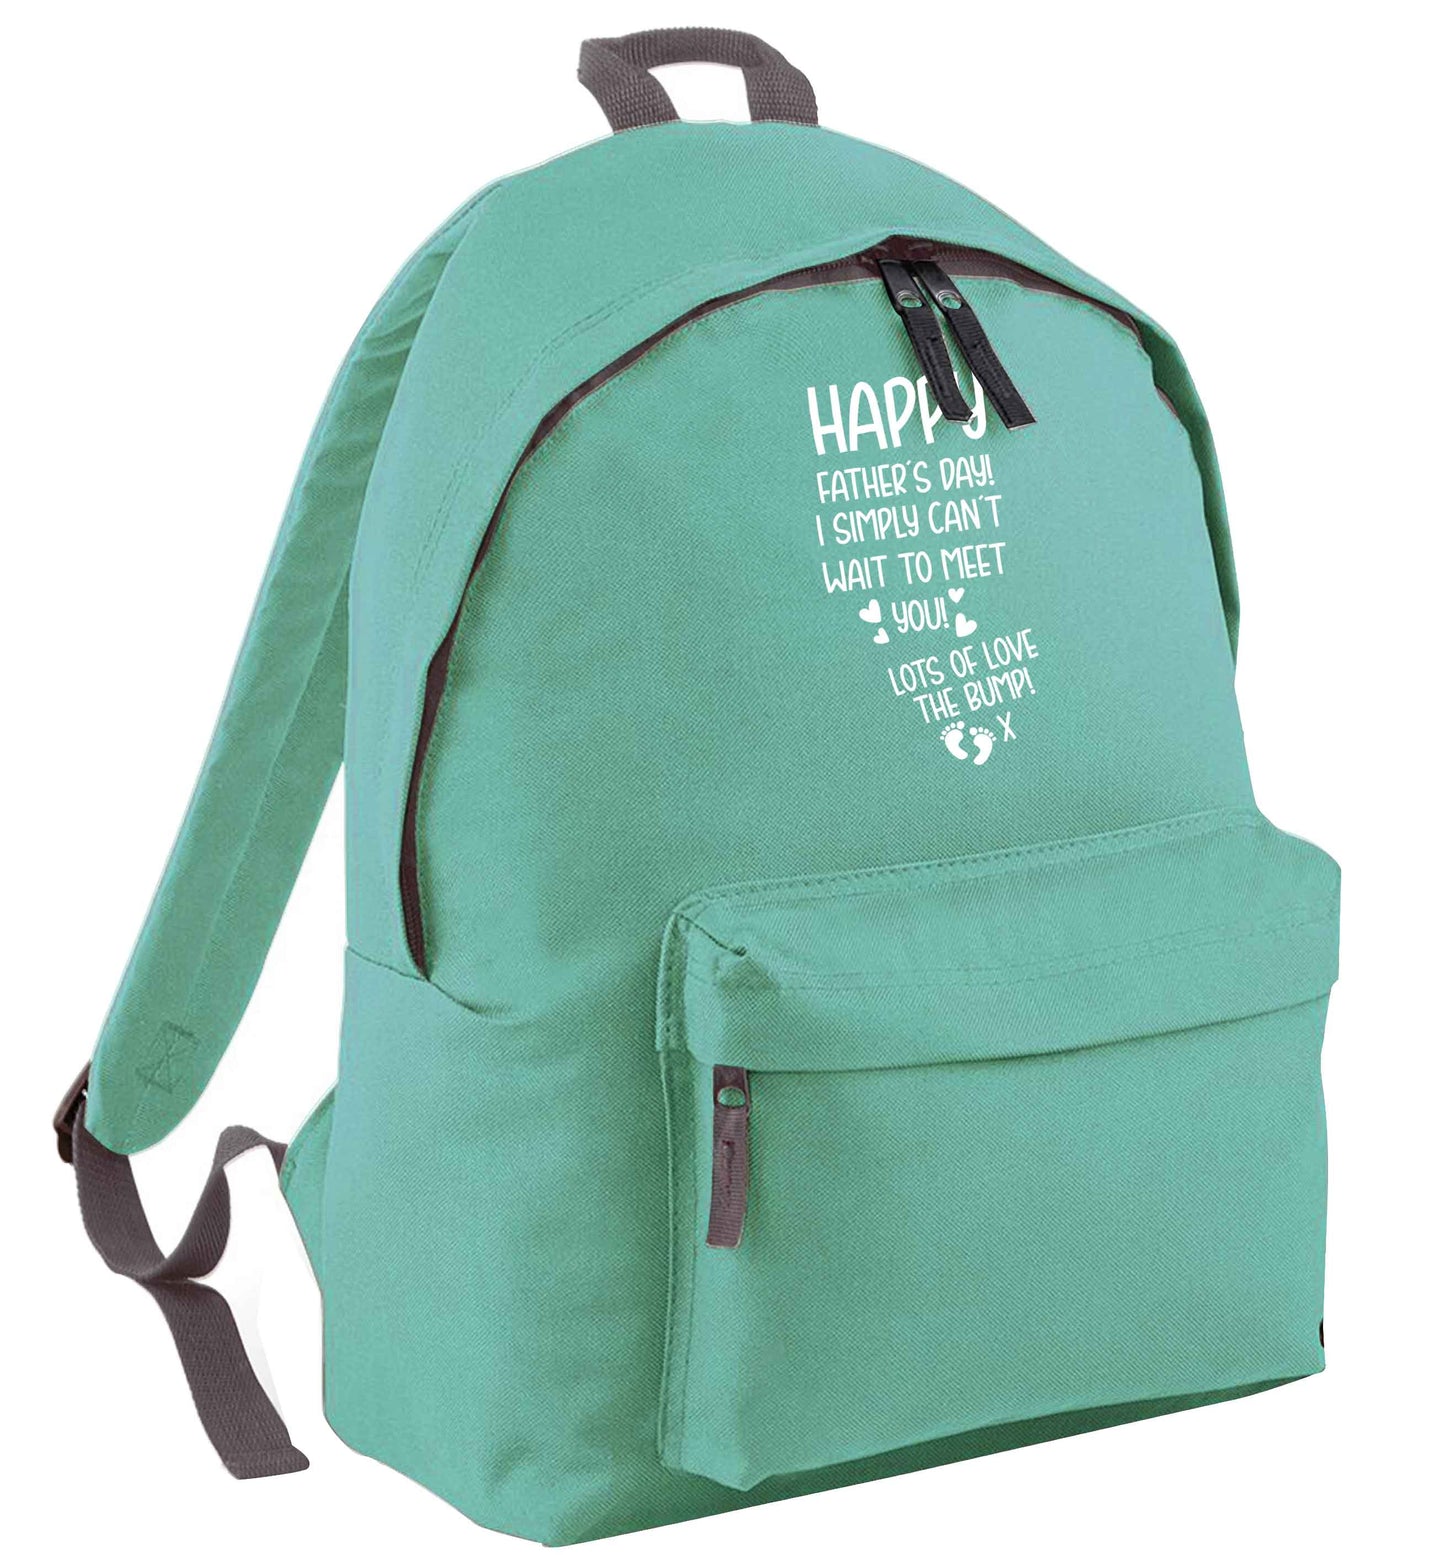 Happy Father's day daddy I can't wait to meet you lot's of love the bump! mint adults backpack